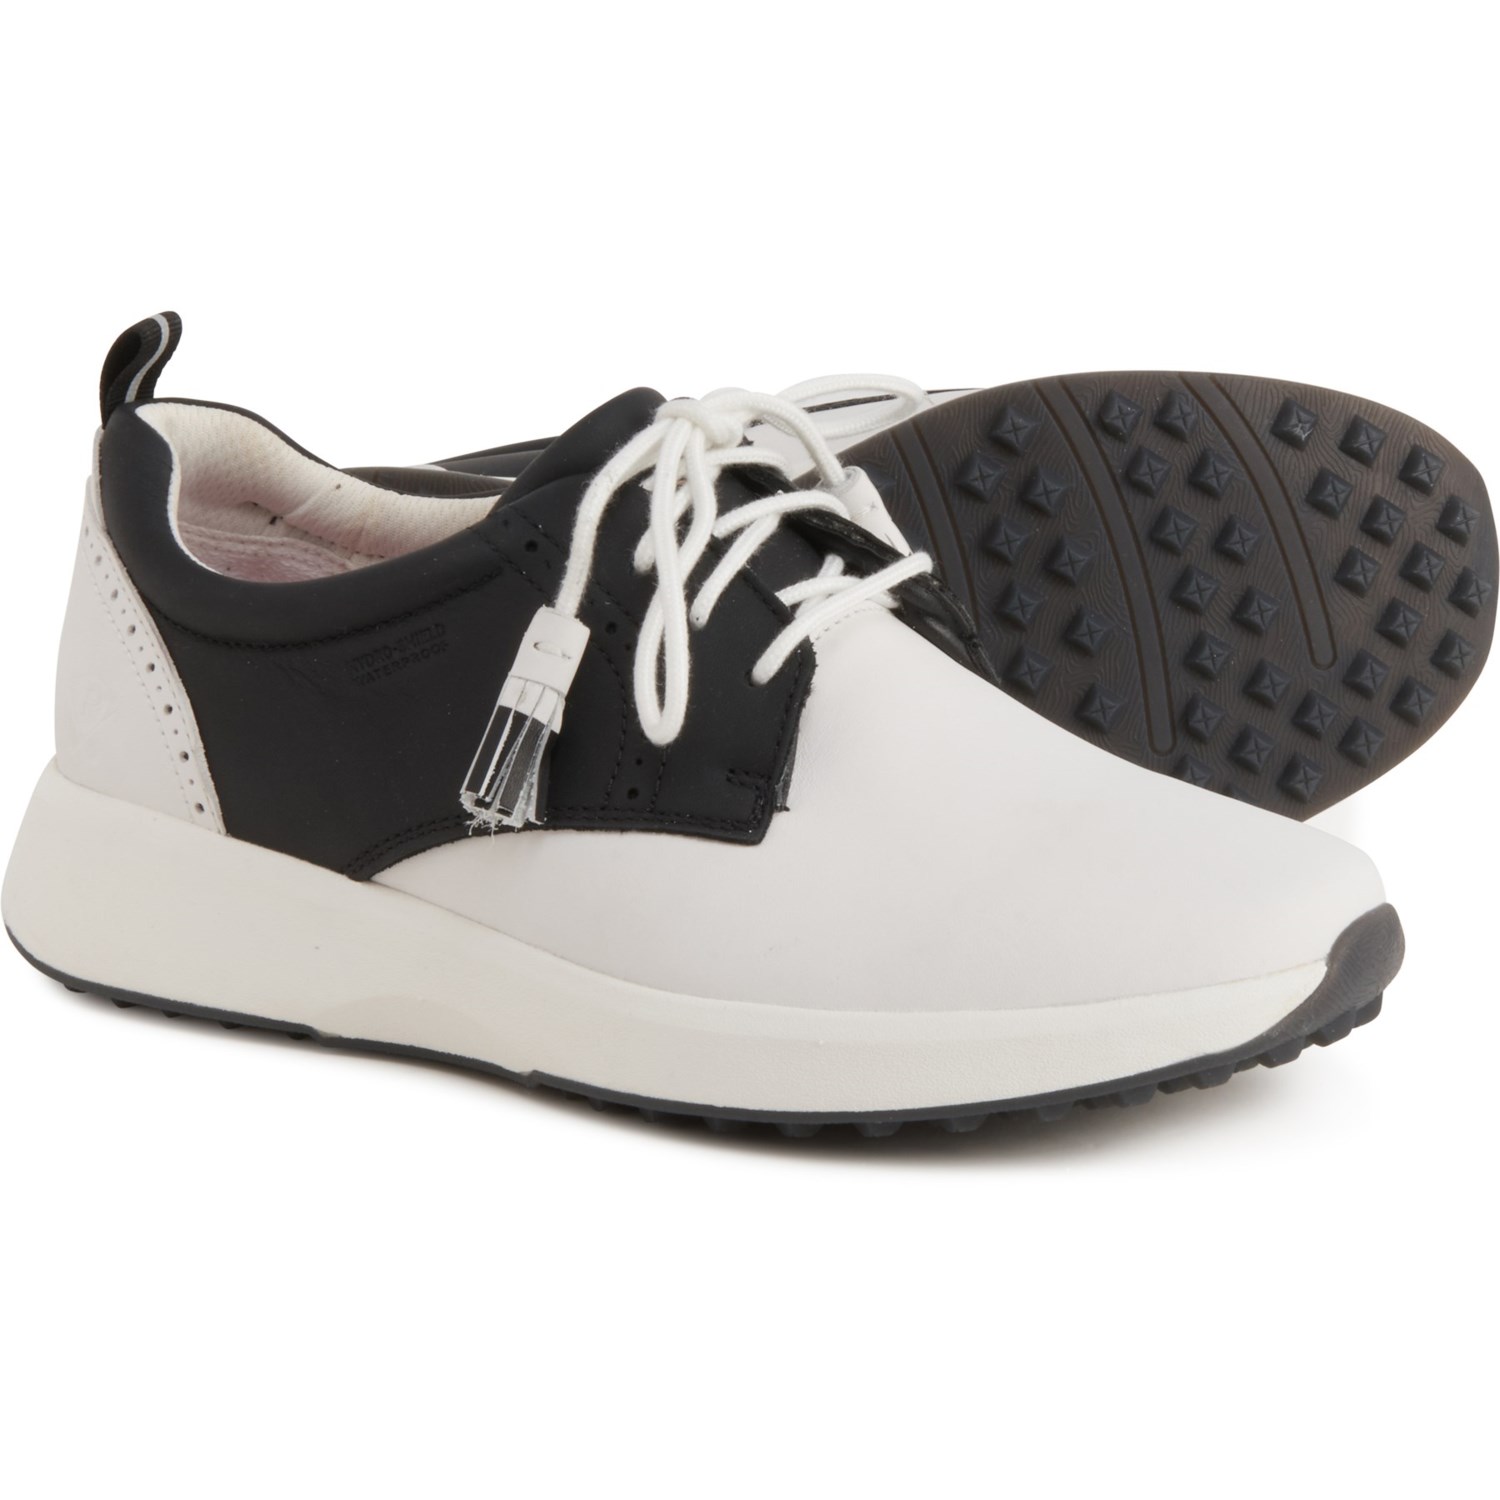 Rockport Golf Shoes (For Women) - Save 33%